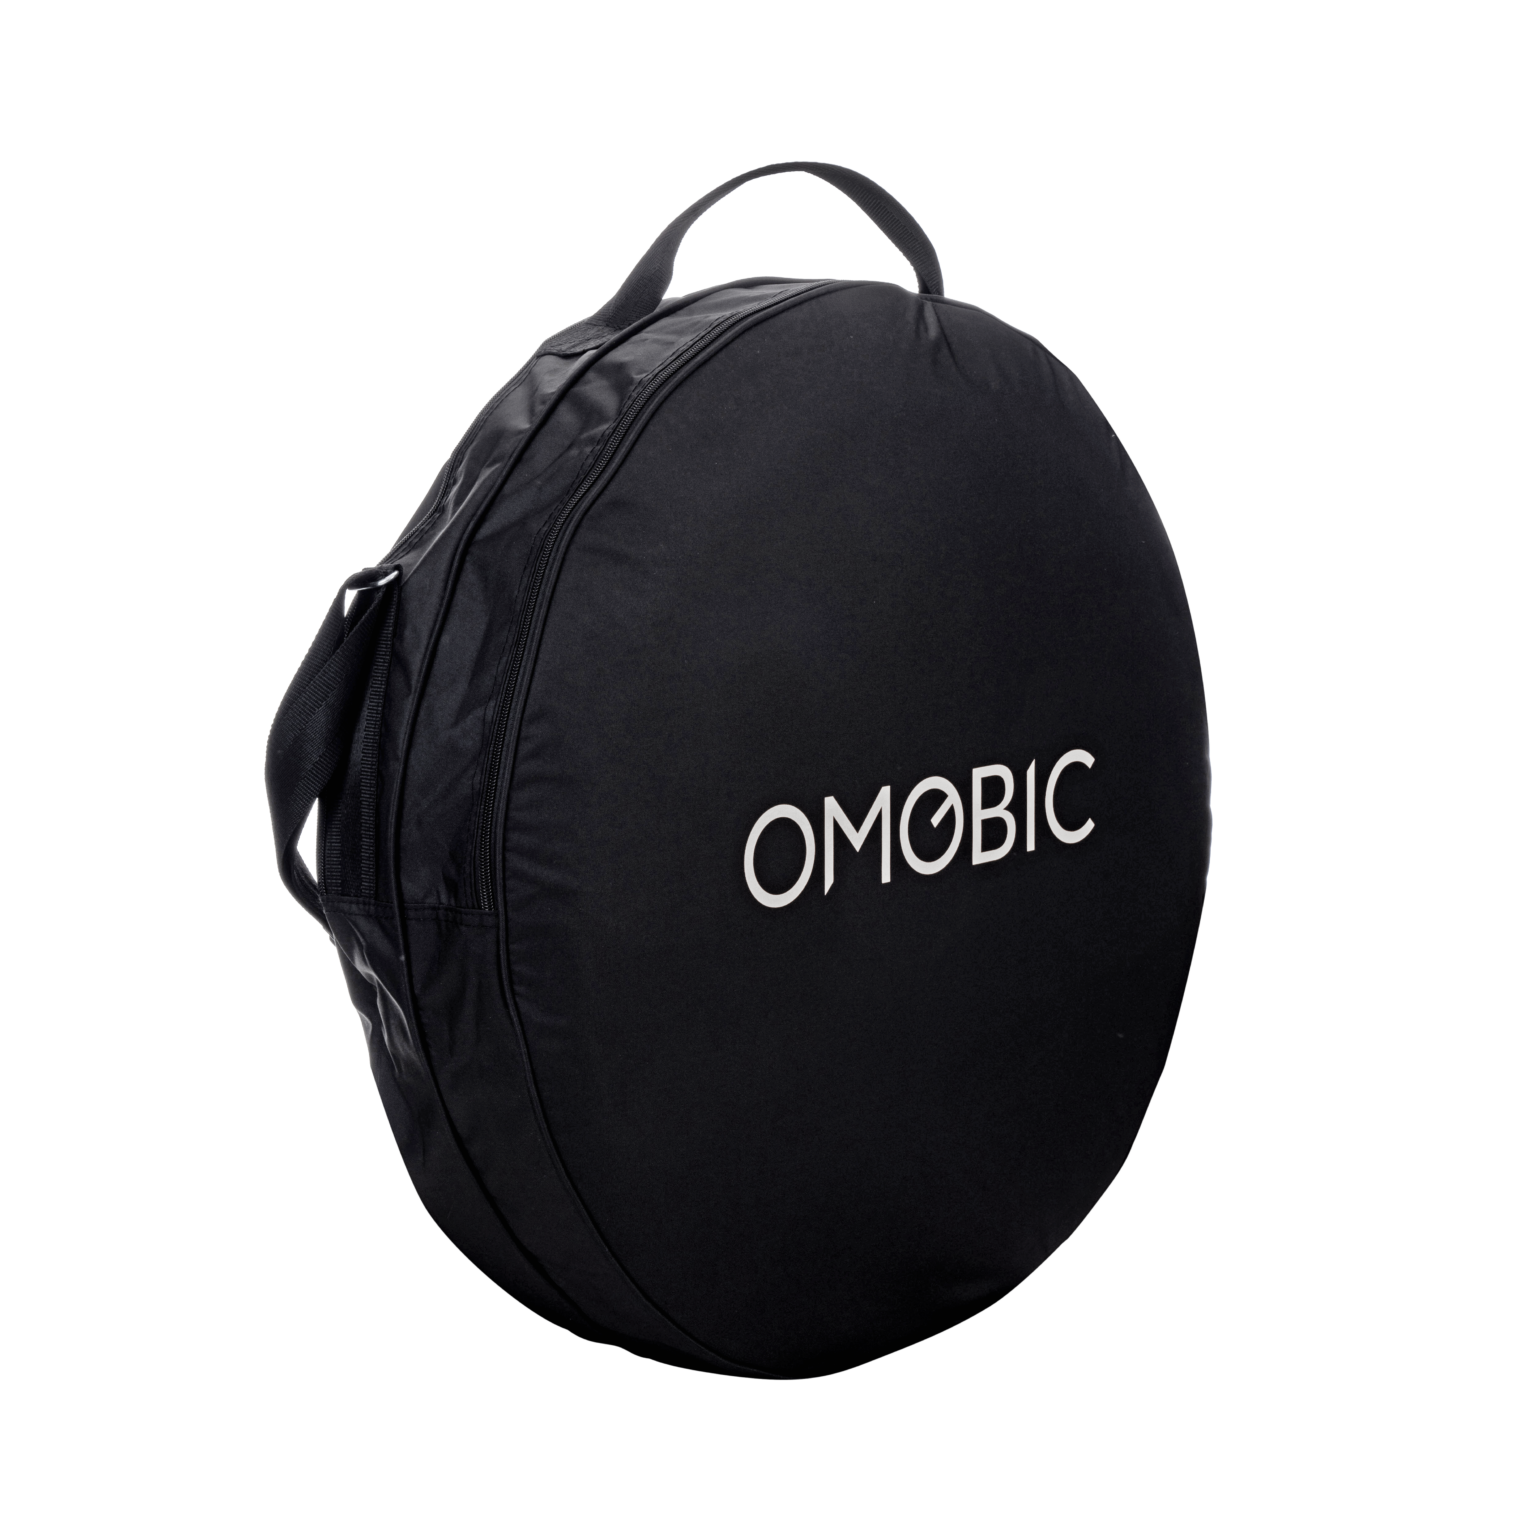 Omobic BAGG - bag for wheels for wheelchair front side